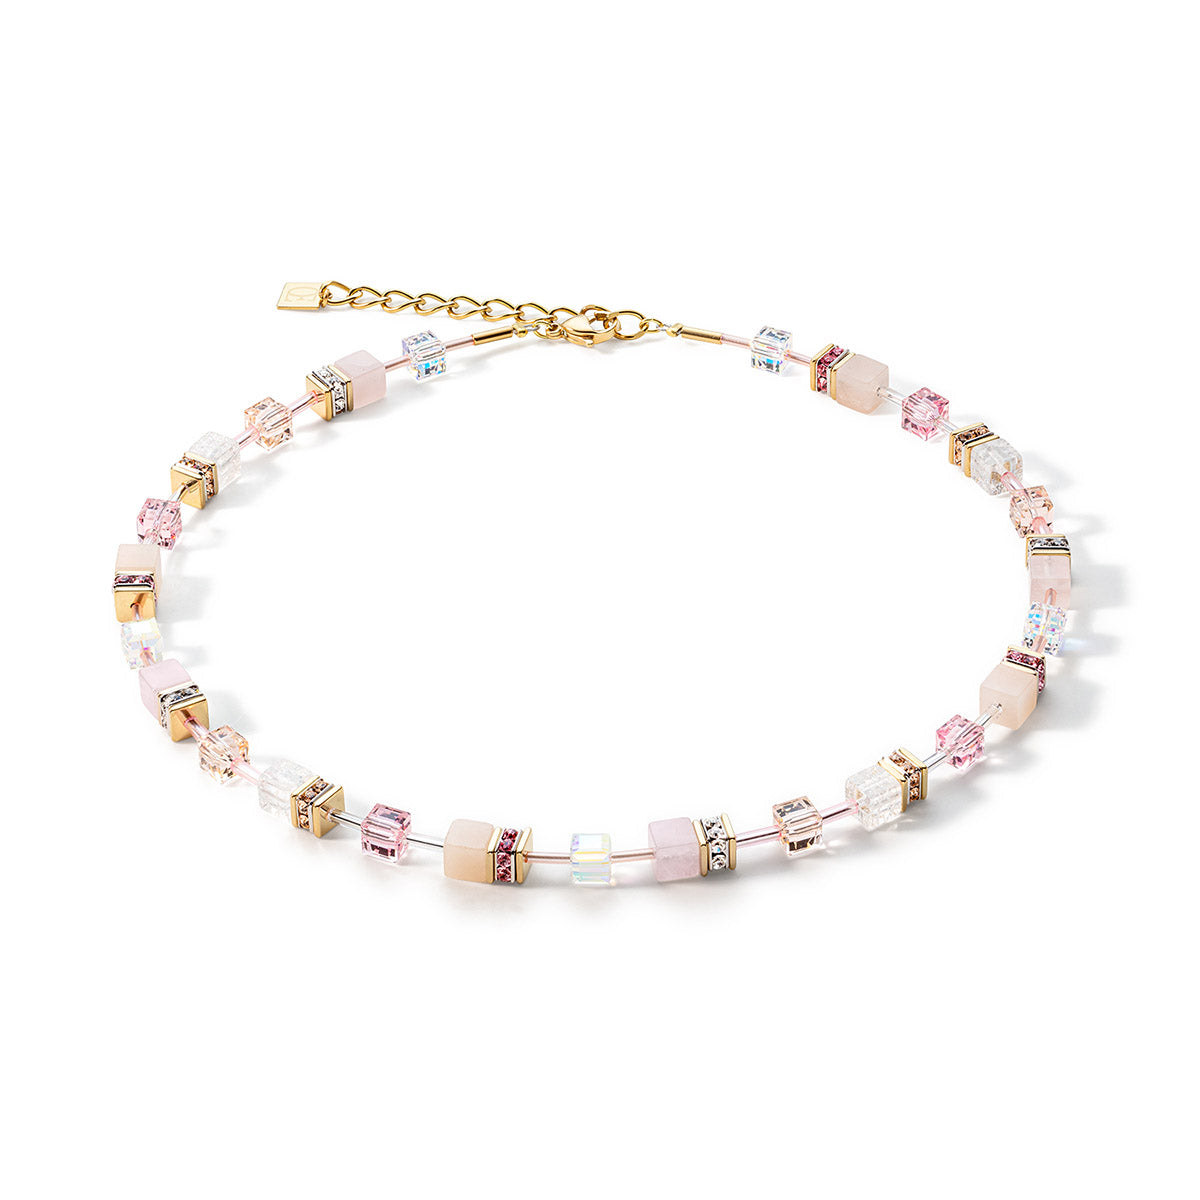 Geo Cube Light Rose & Champagne Necklace 4605/10_1920